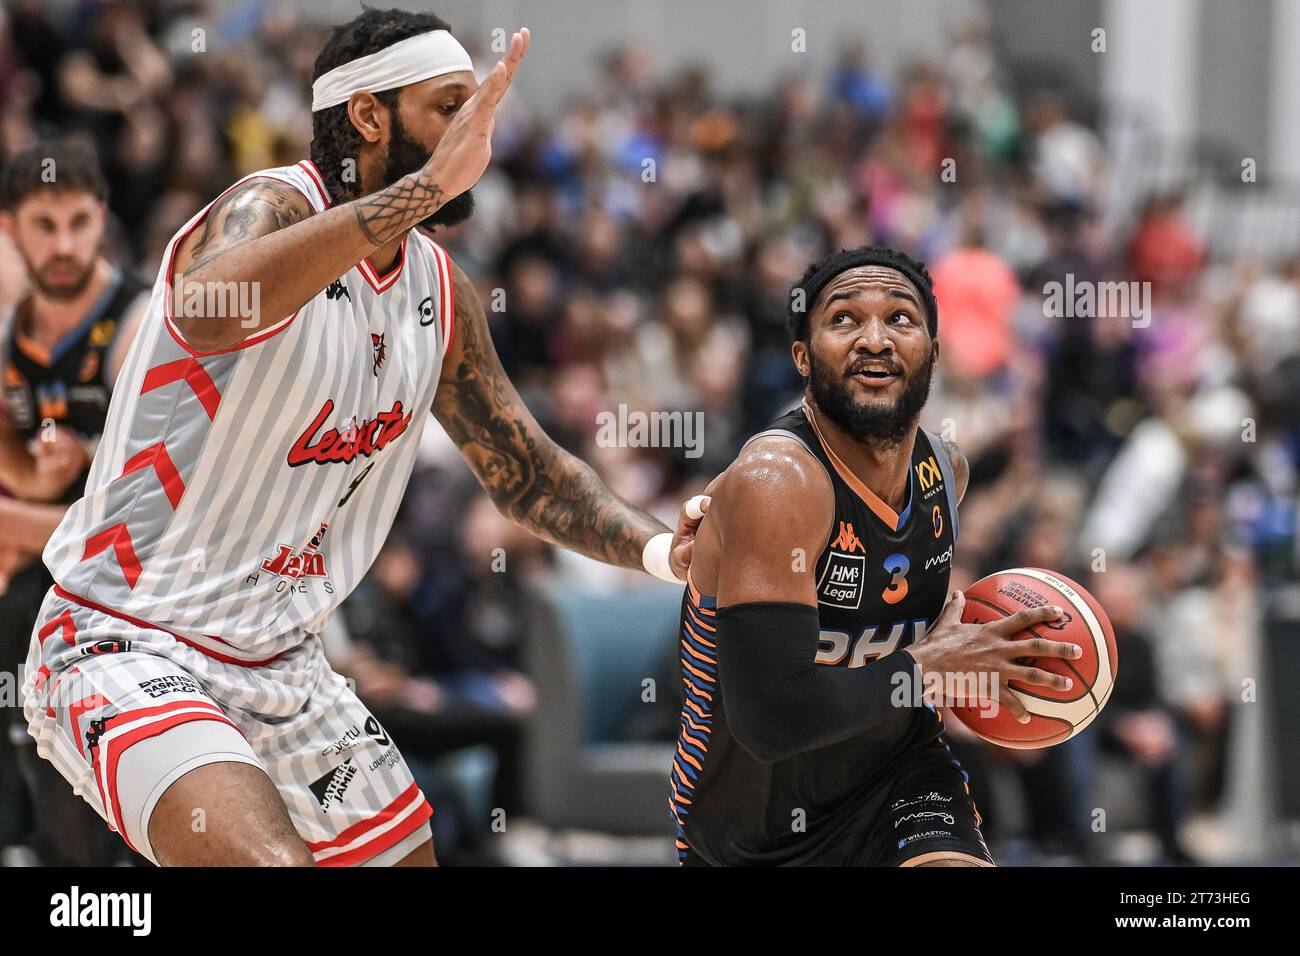 LaQuincy Rideau of Cheshire Phoenix in action during the British Basketball Championship match Cheshire Phoenix vs Leicester Riders at Ellesmere Port Sports Village, Ellesmere Port, United Kingdom, 12th November 2023 (Photo by Craig Thomas/News Images) Stock Photo